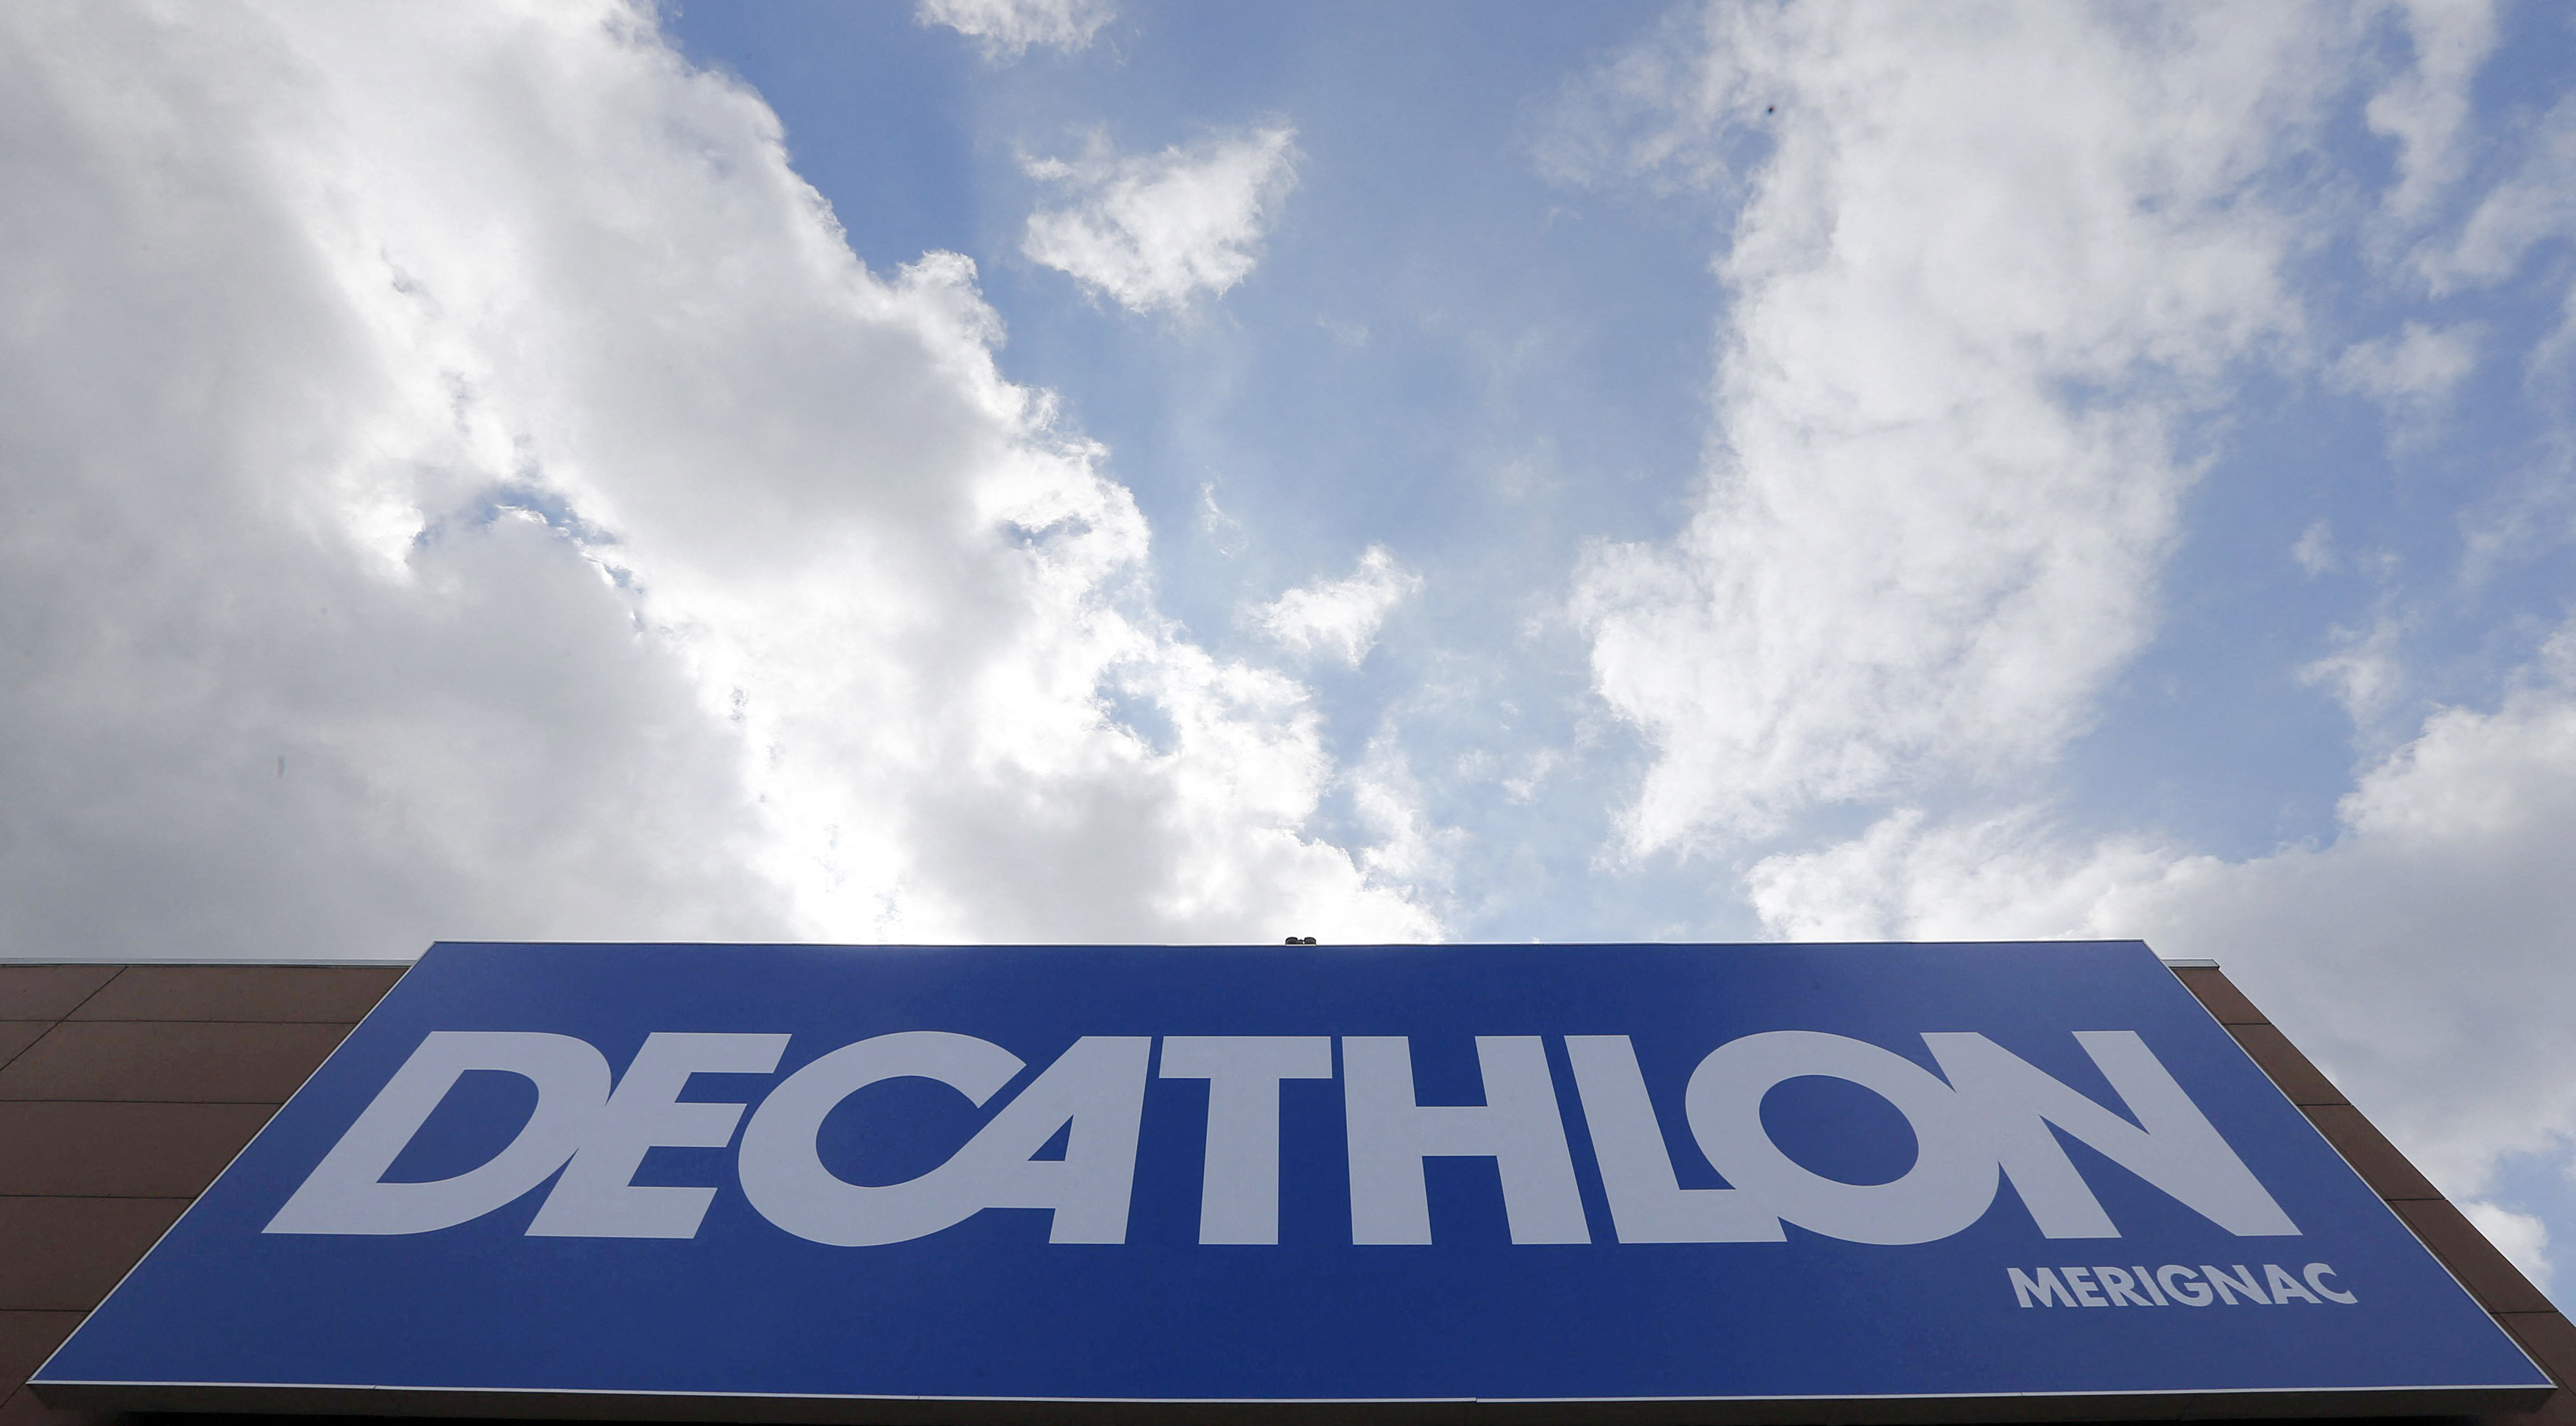 The logo of Decathlon is seen at the entrance of the French sports equipment and sportswear company Decathlon store in Merignac near Bordeaux